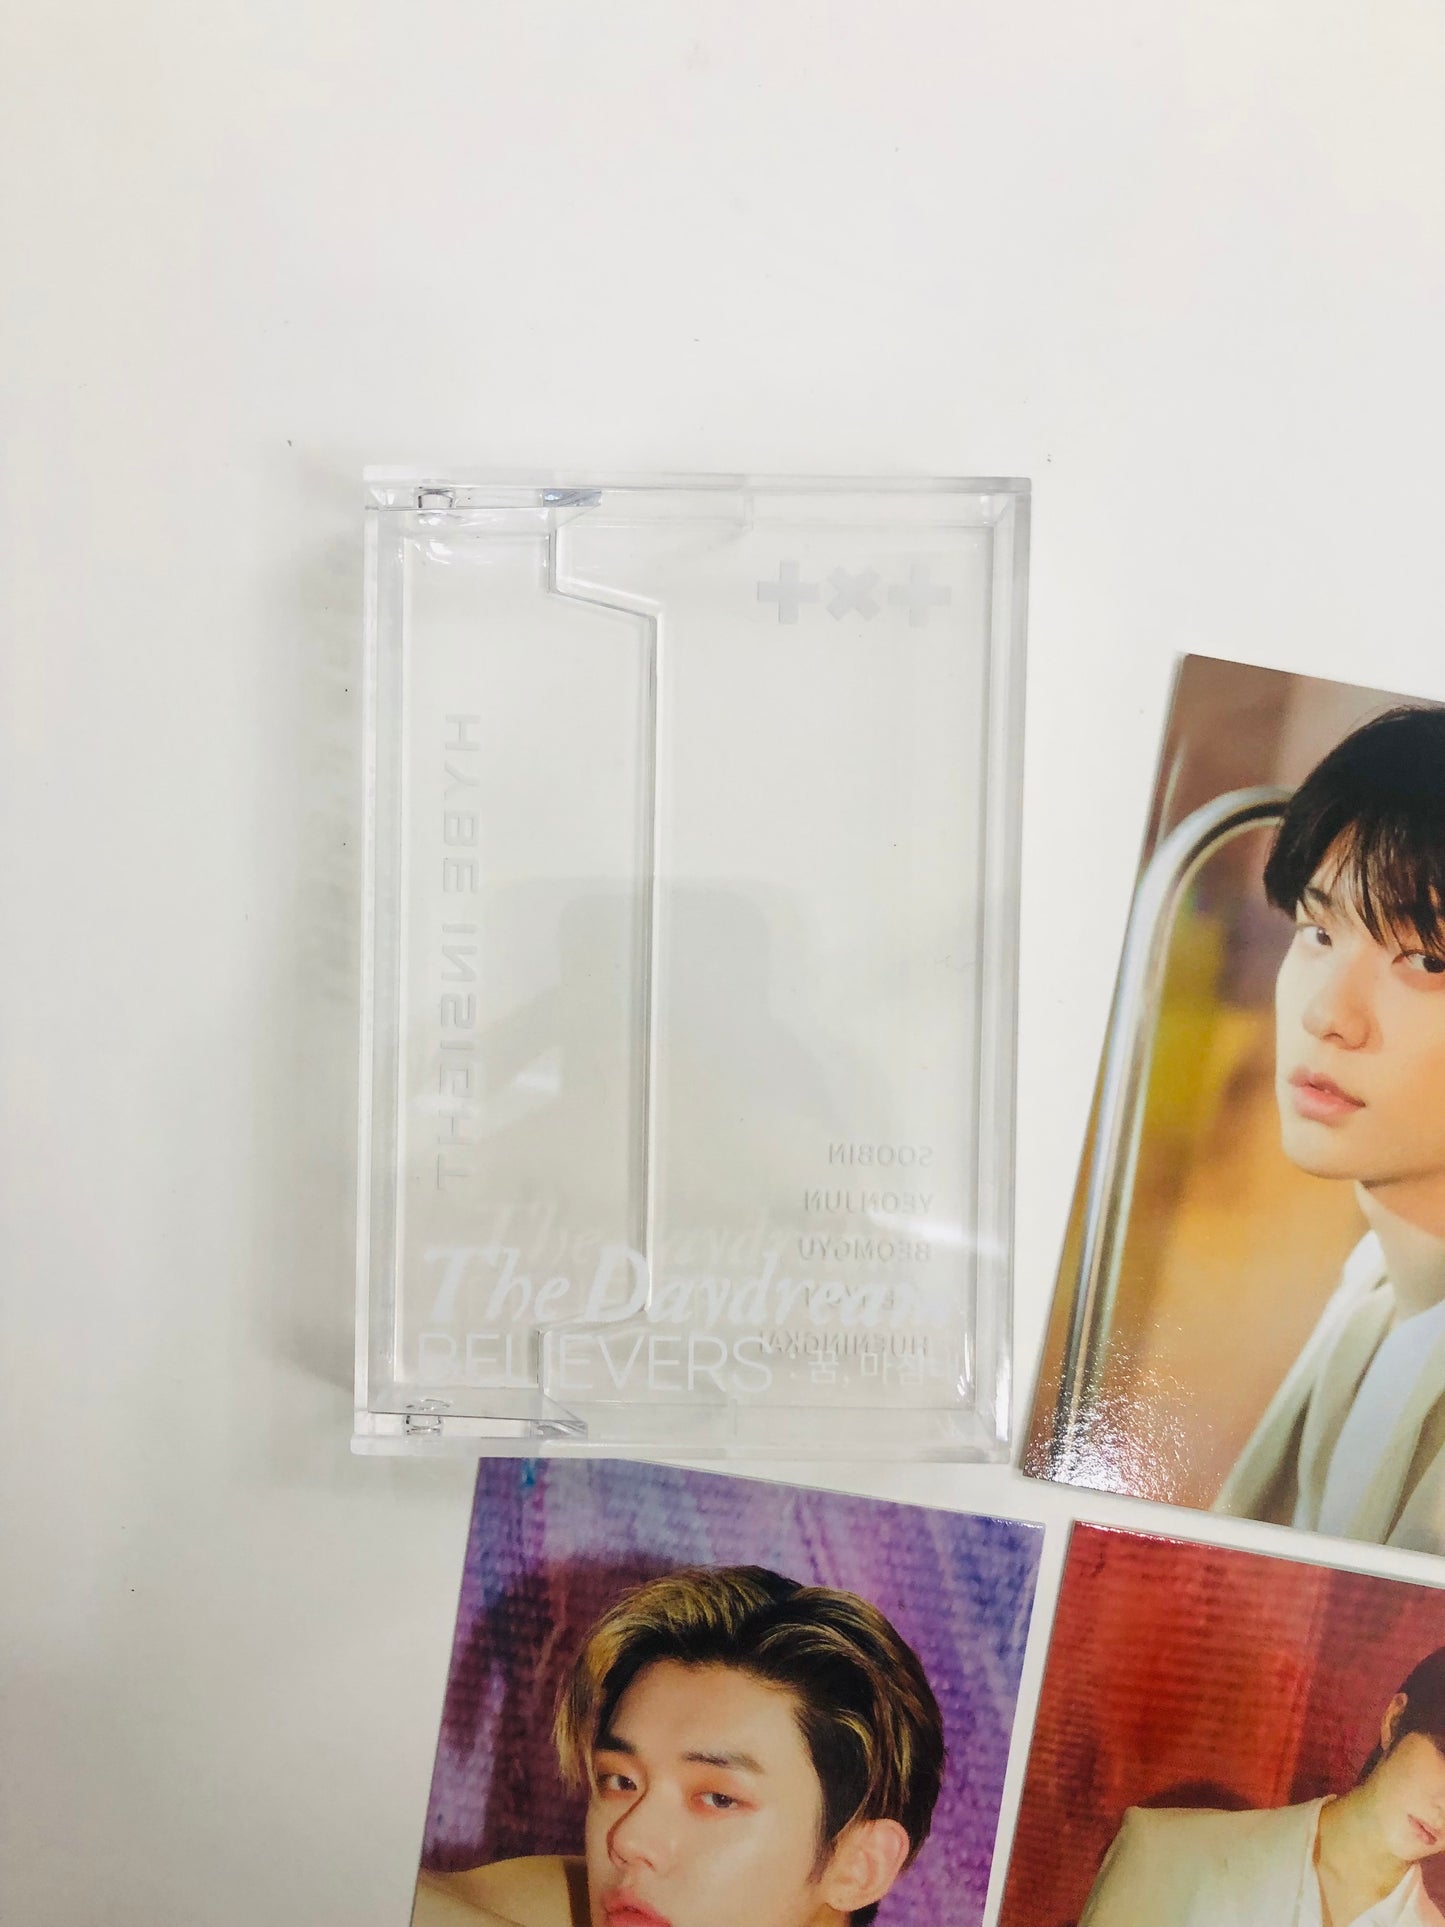 TXT The Daydream Believers Official Photocards